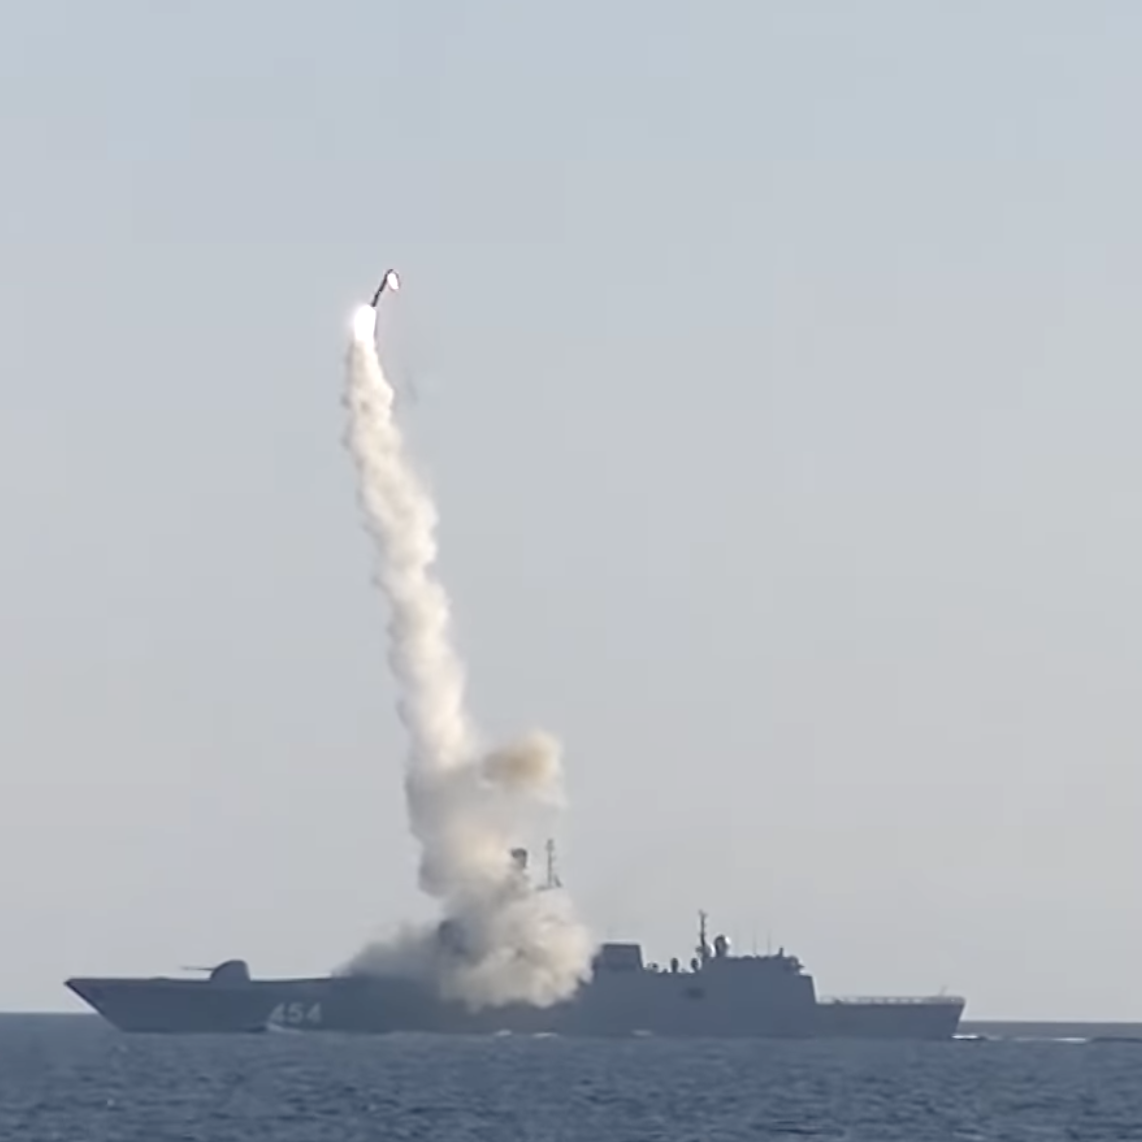 Watch Russia Test Its Spine-Chilling 'Mach 7' Missile